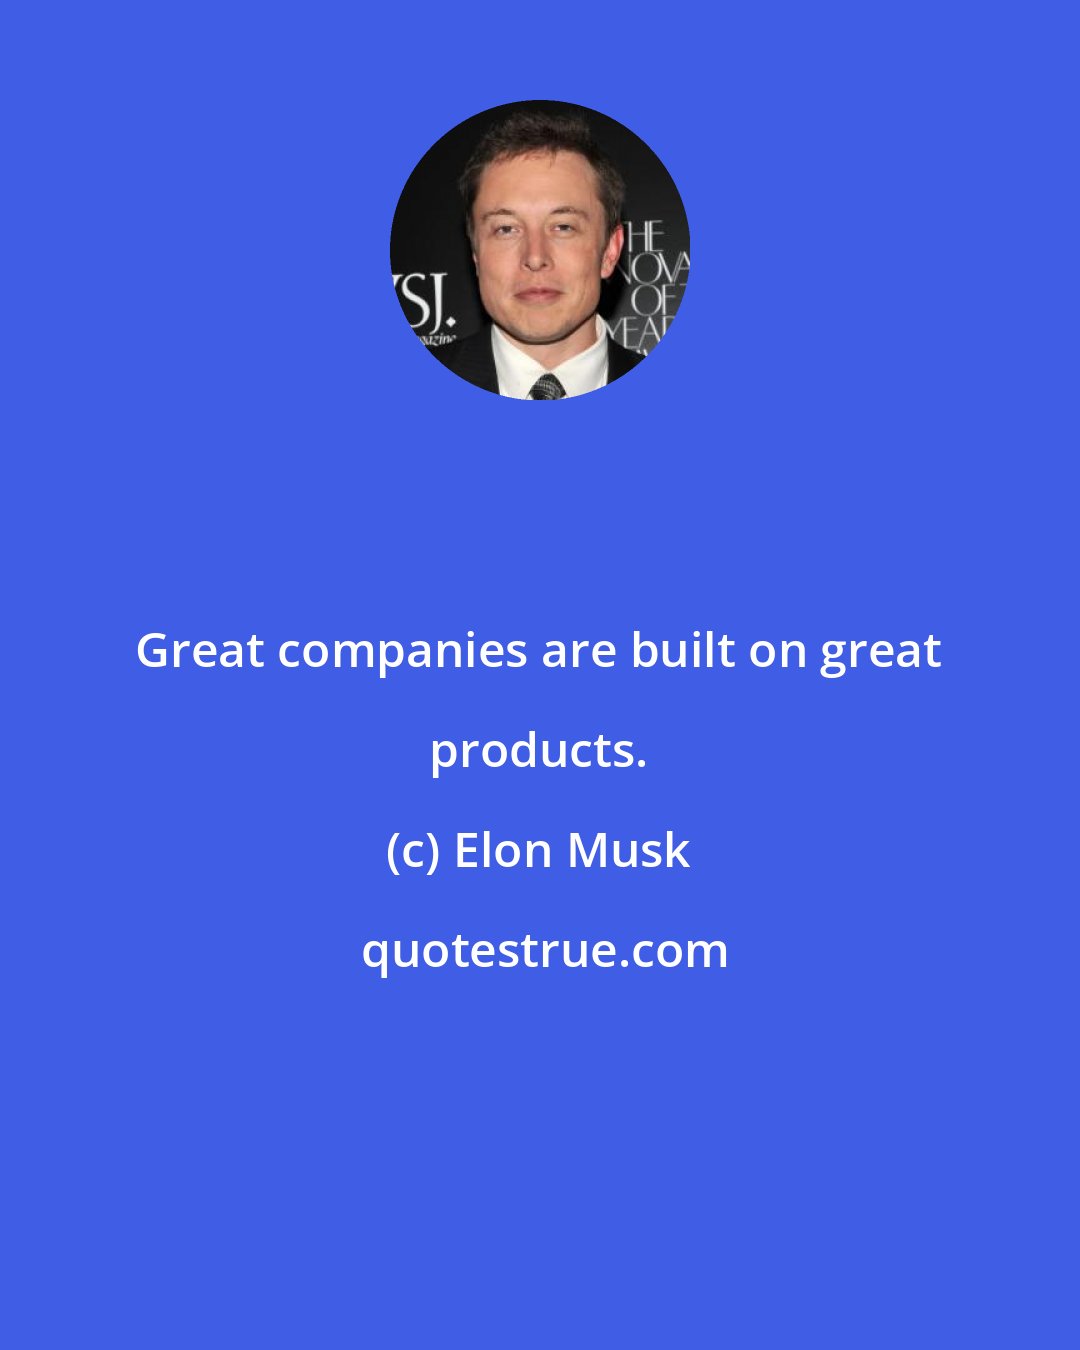 Elon Musk: Great companies are built on great products.